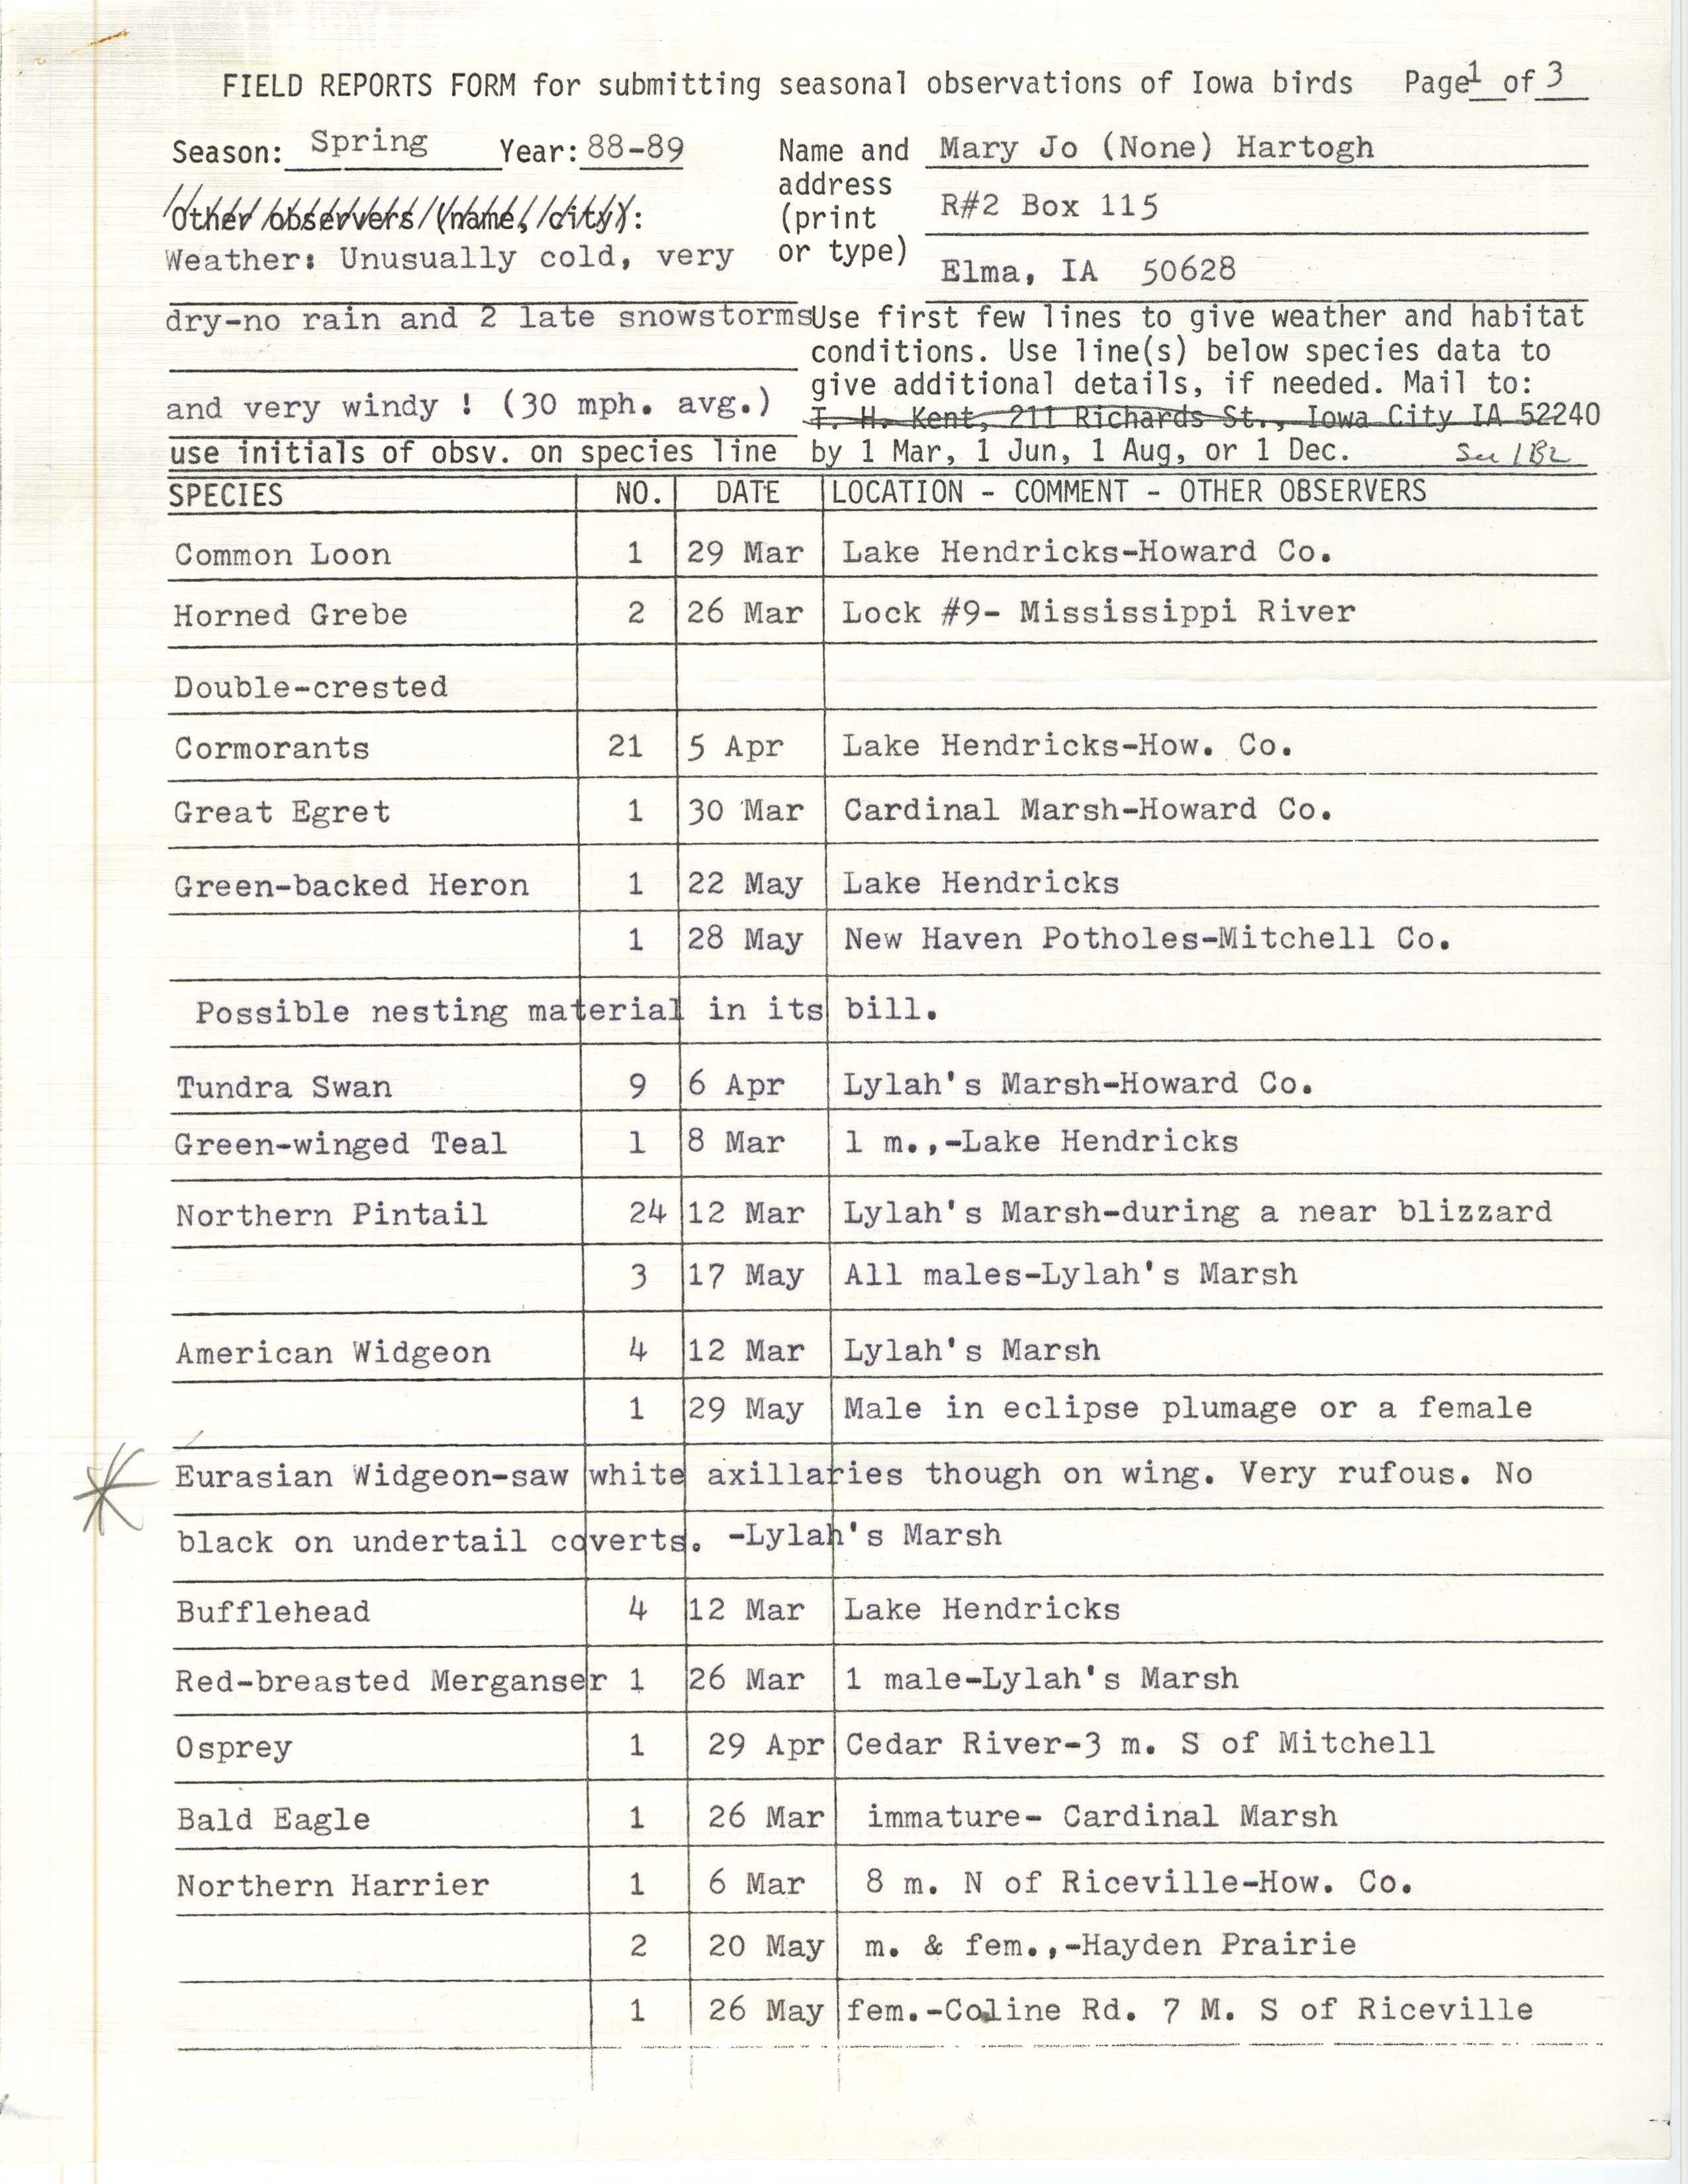 Field reports form for submitting seasonal observations of Iowa birds, Mary Jo Hartogh, spring 1988